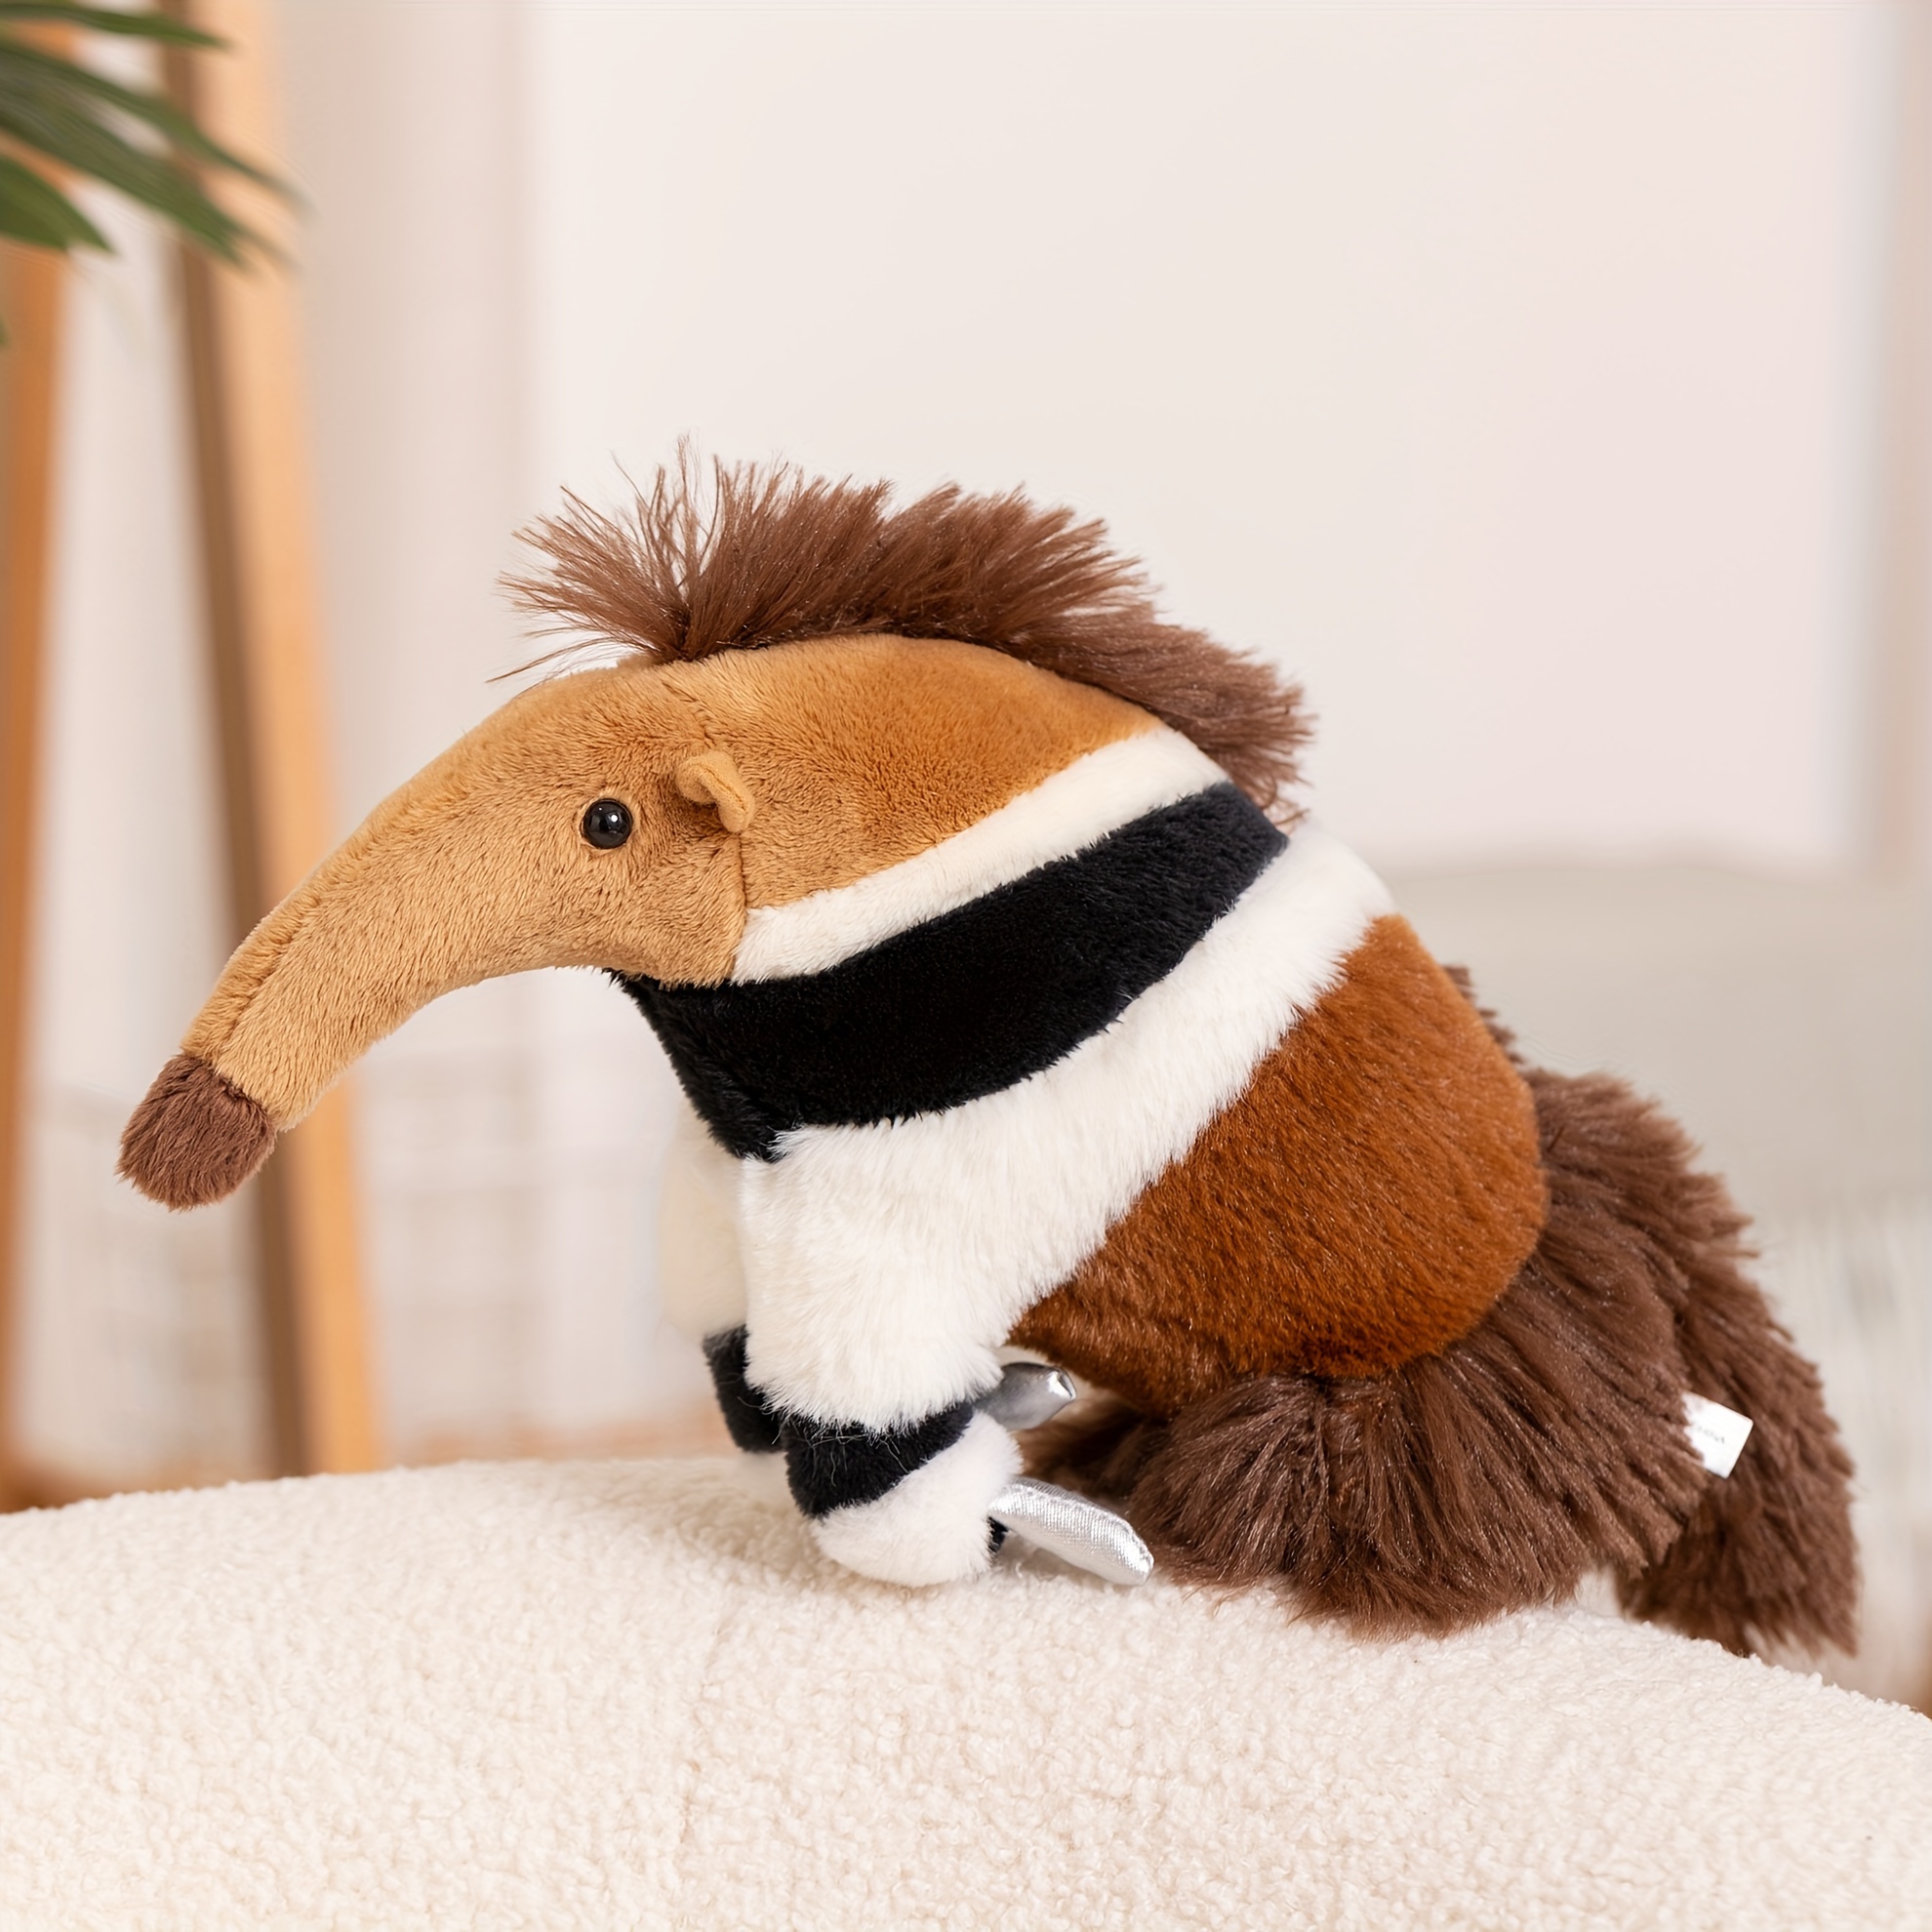 25cm/9.84in Brown Anteater Simulated Animals Soft Stuffed Plush Doll Furry  To Touch Nice Ornament Friends Gifts Home Decor Party Decor Cute Doll Plush  To Decorate Your Perfect Home